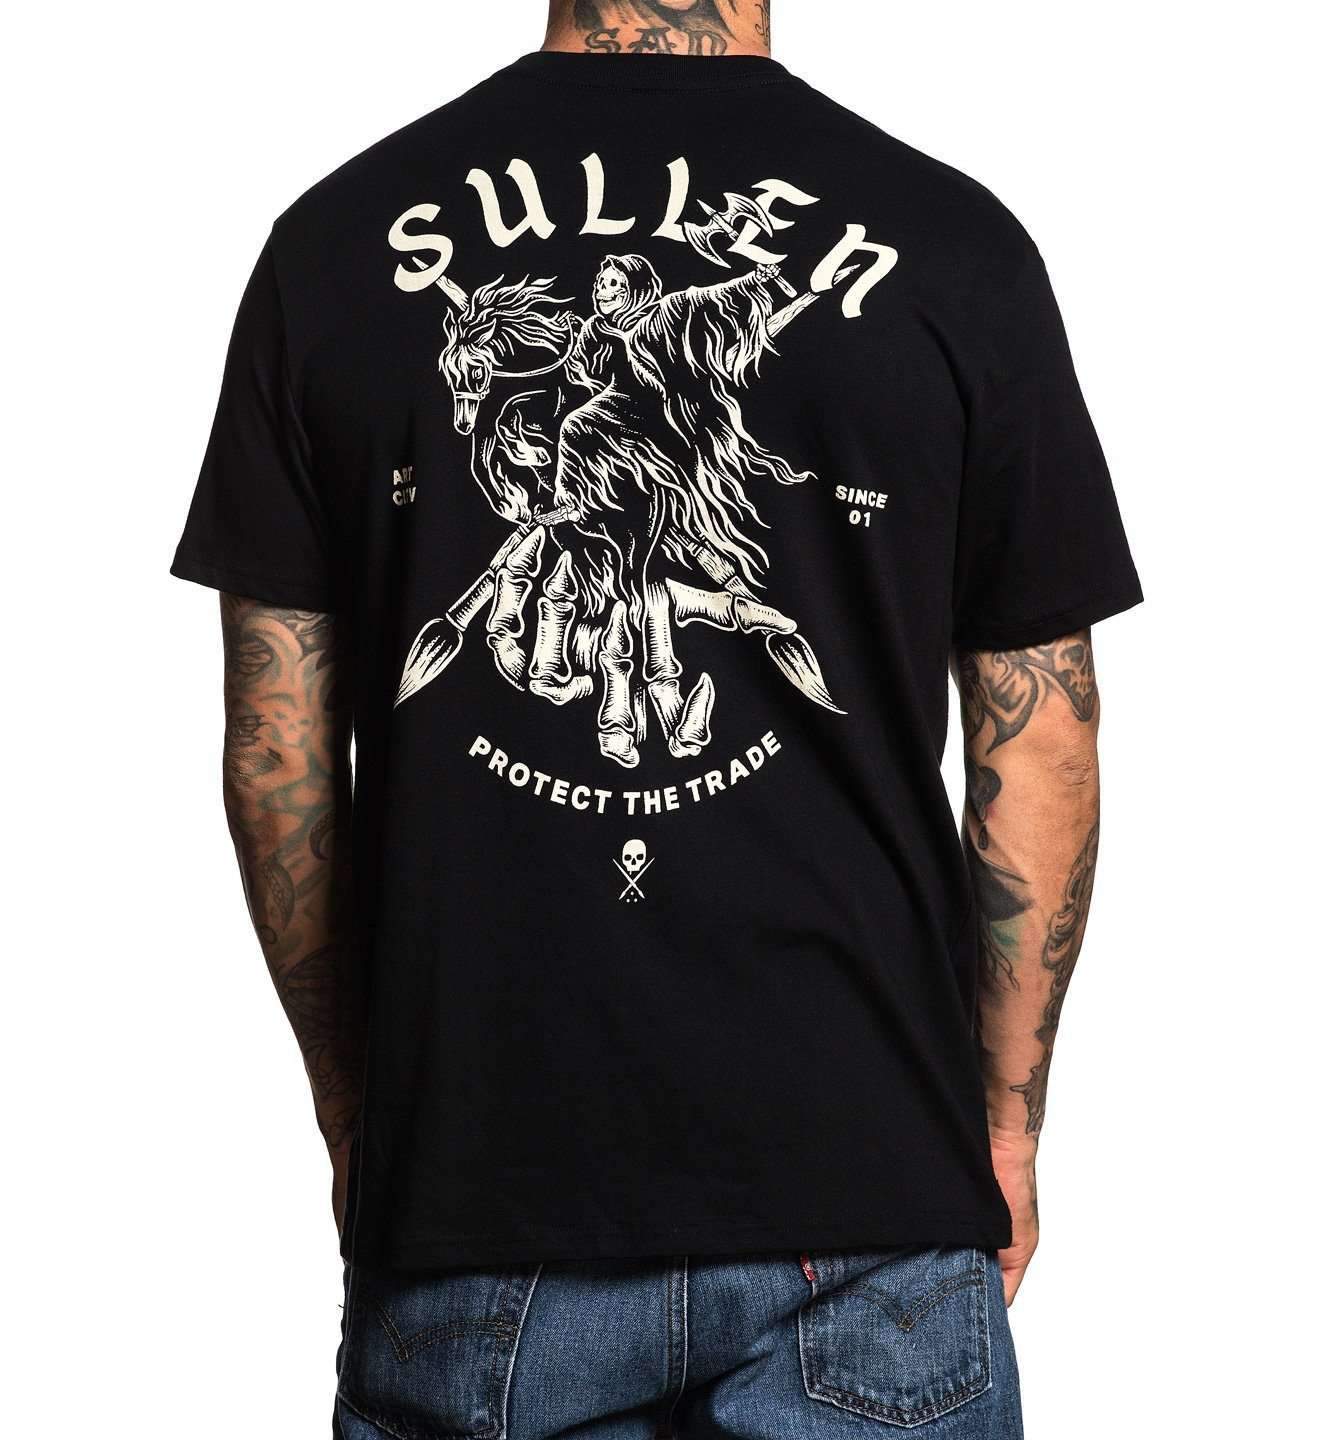 Defenders T-Shirt by Sullen | Tattoo Supply | Professional Tattoo Supplies Equipment